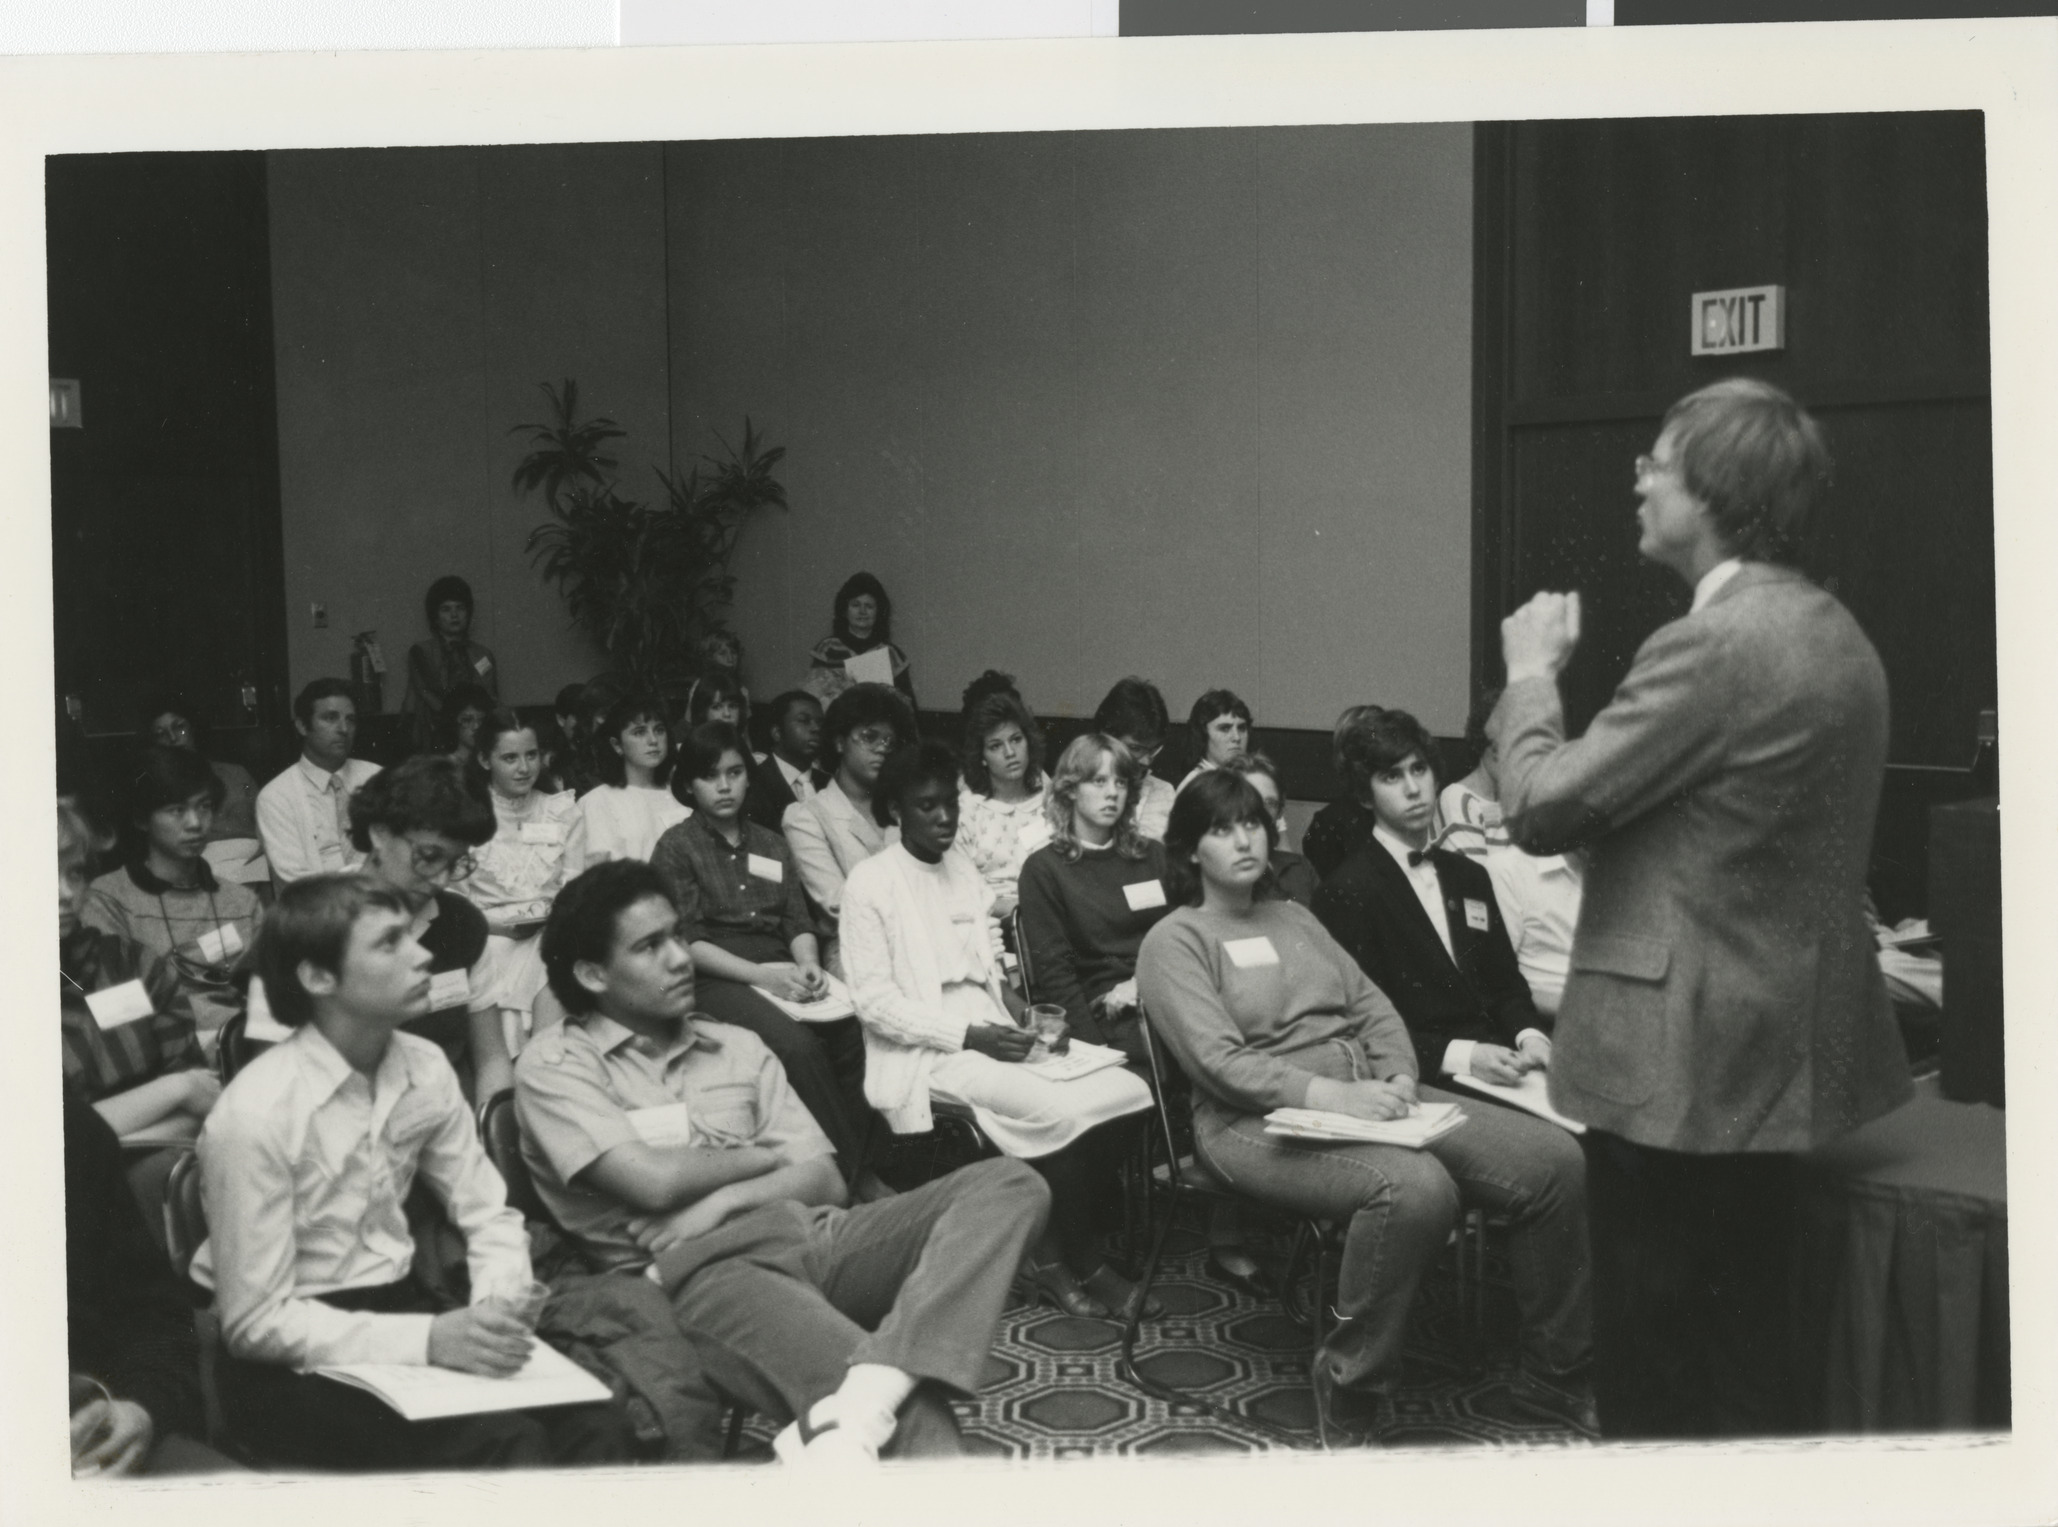 Photograph of Holocaust Conference Teaching session at Holiday Inn Breakfast Room, 1984